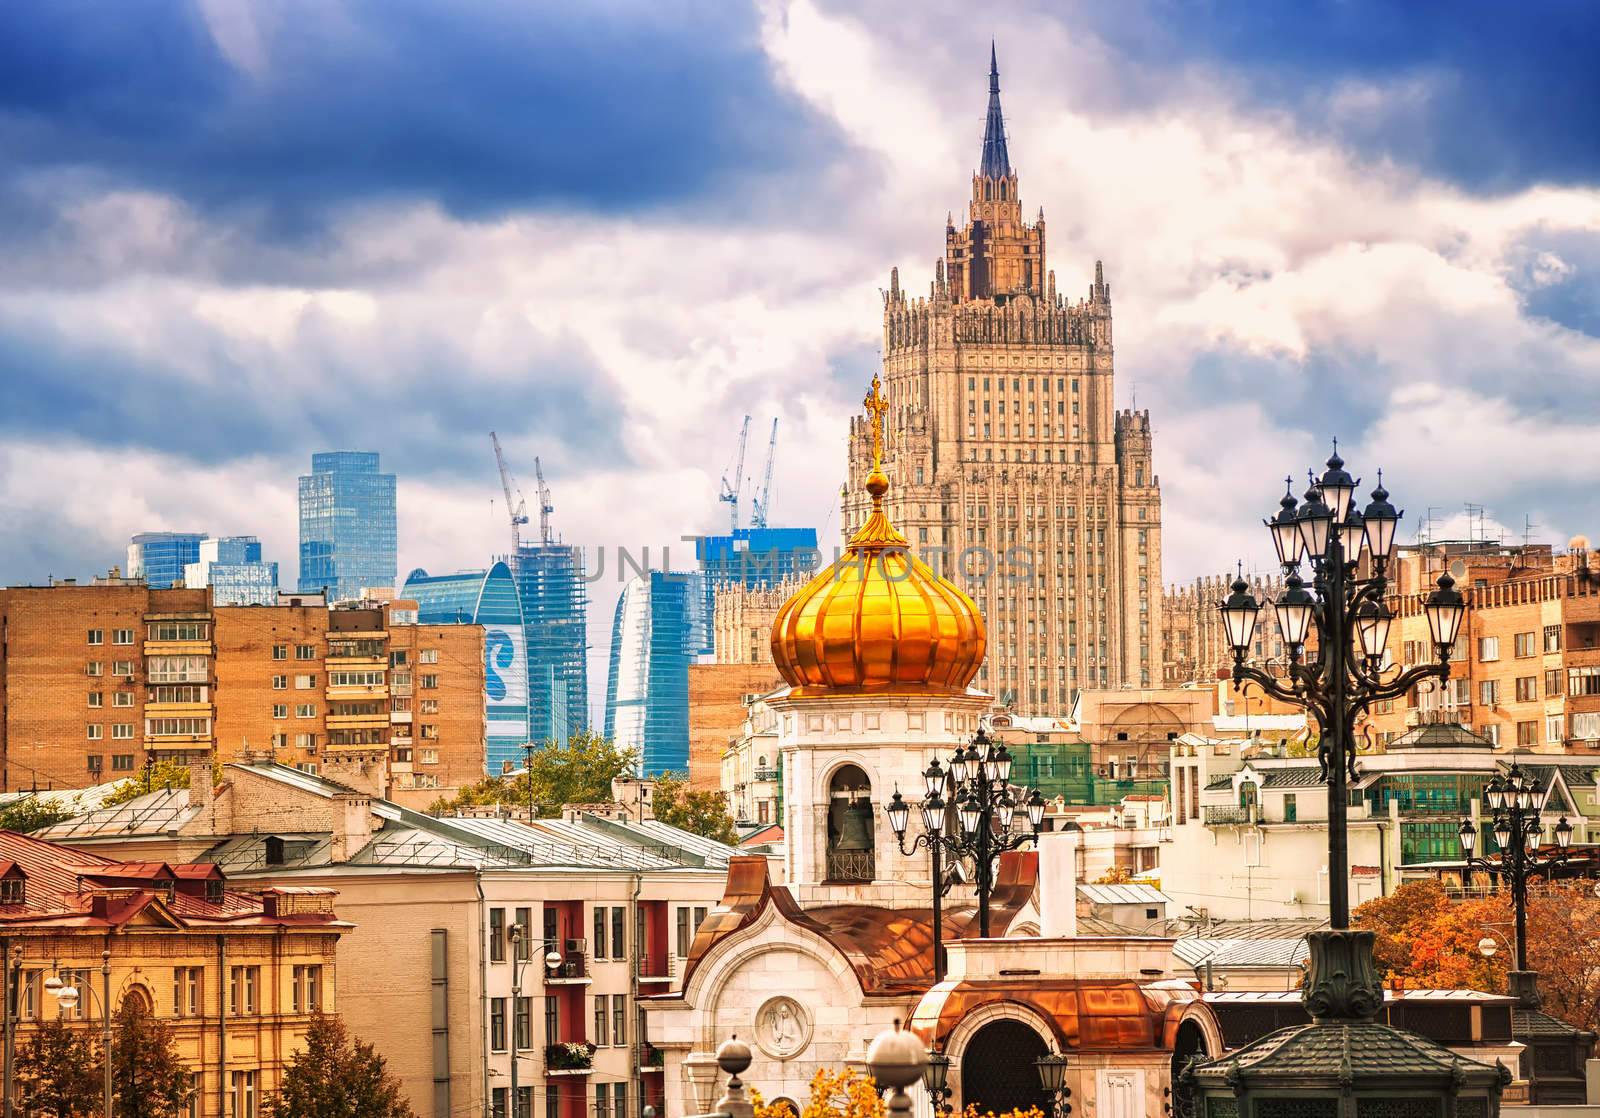 Panoramic view of Moscow featuring traditional russian architecture styles from different time periods, Russia